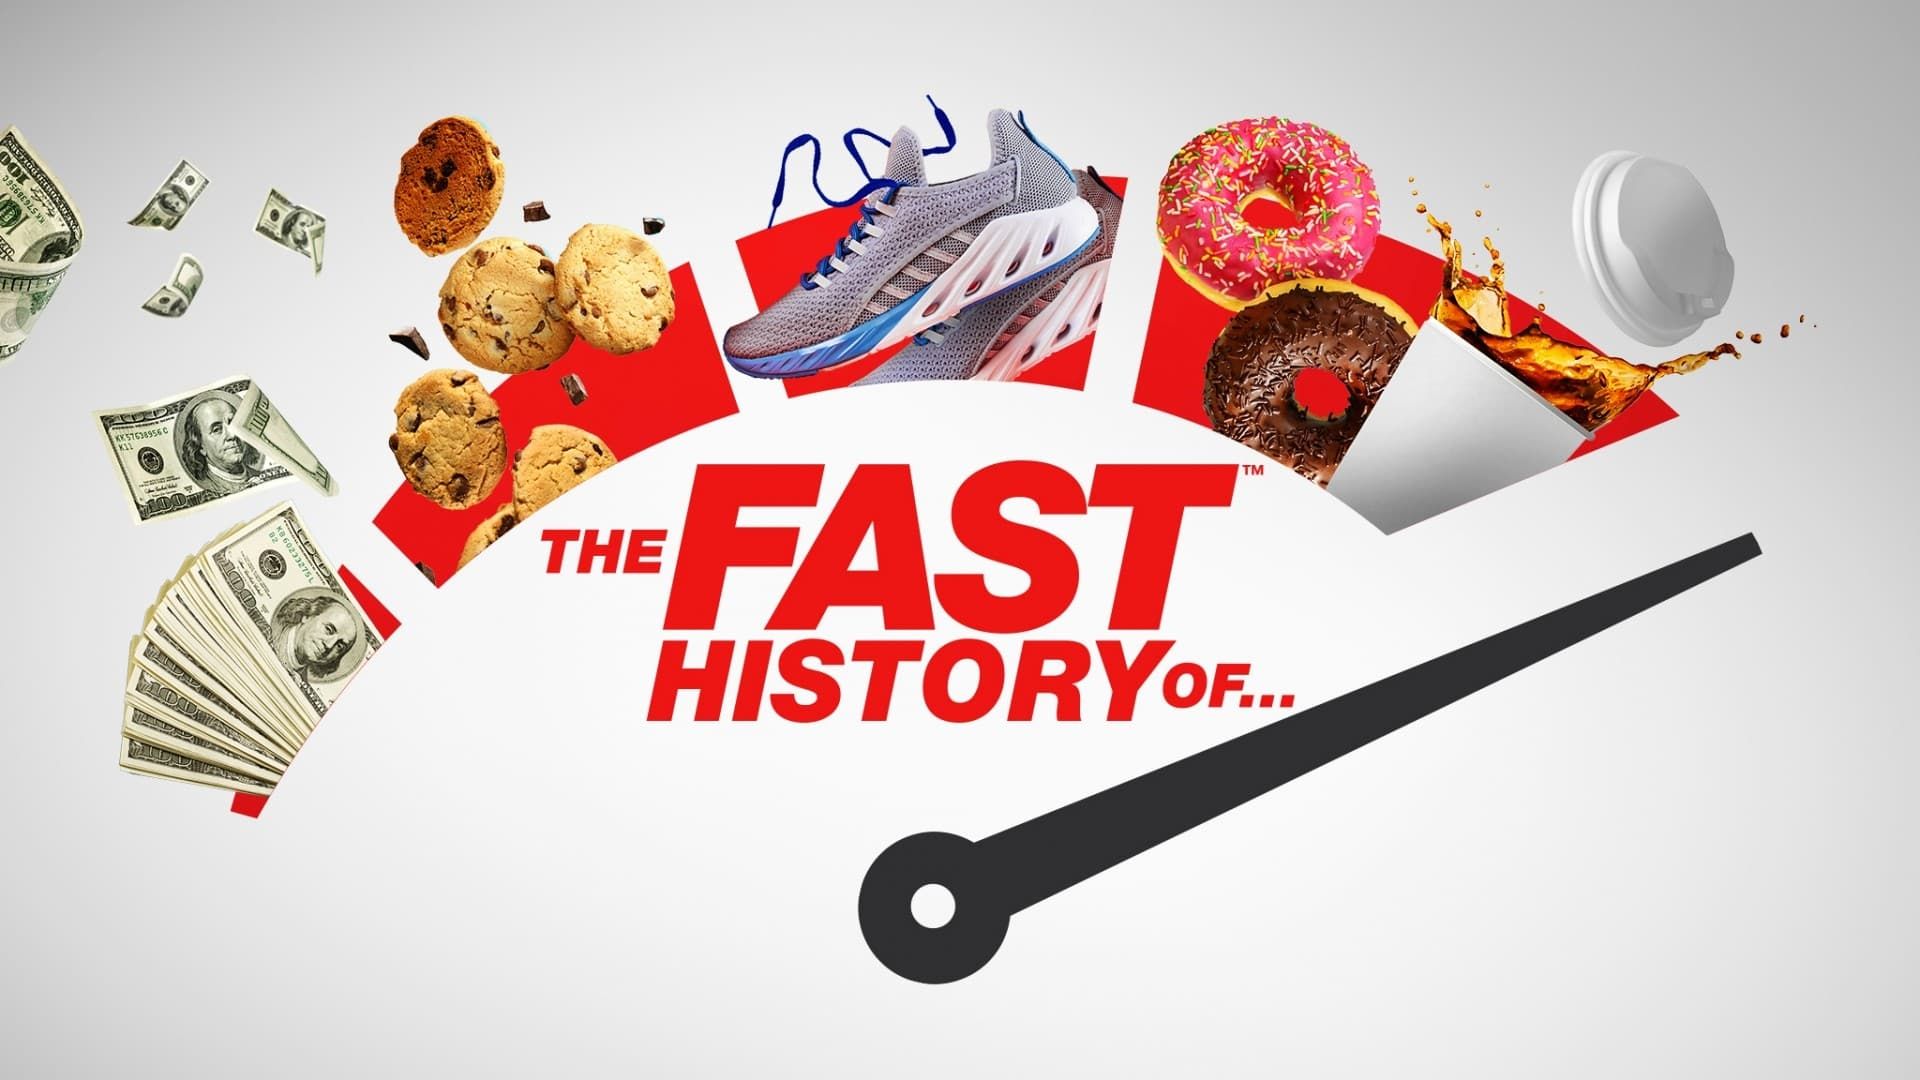 The Fast History Of background